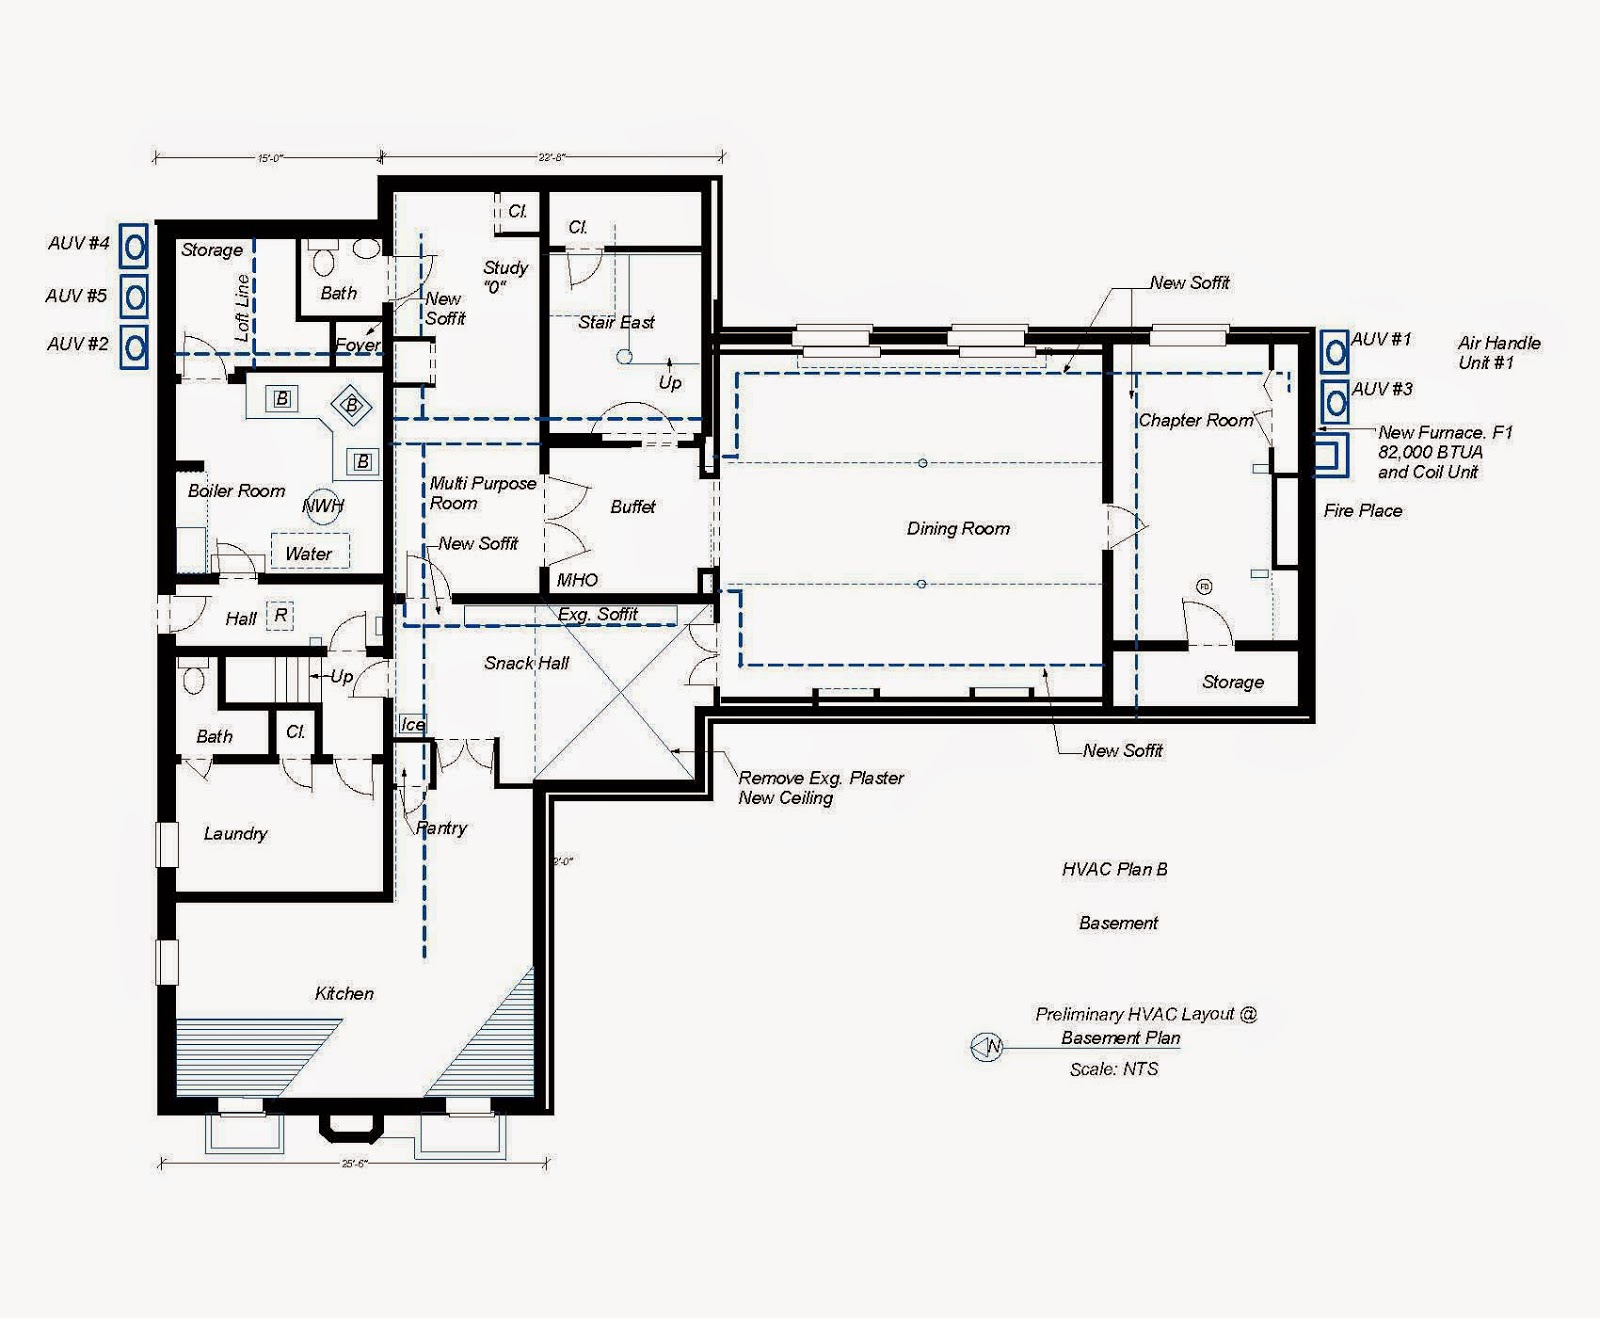 Electric Work: Home Electrical Wiring Blueprint and Layout